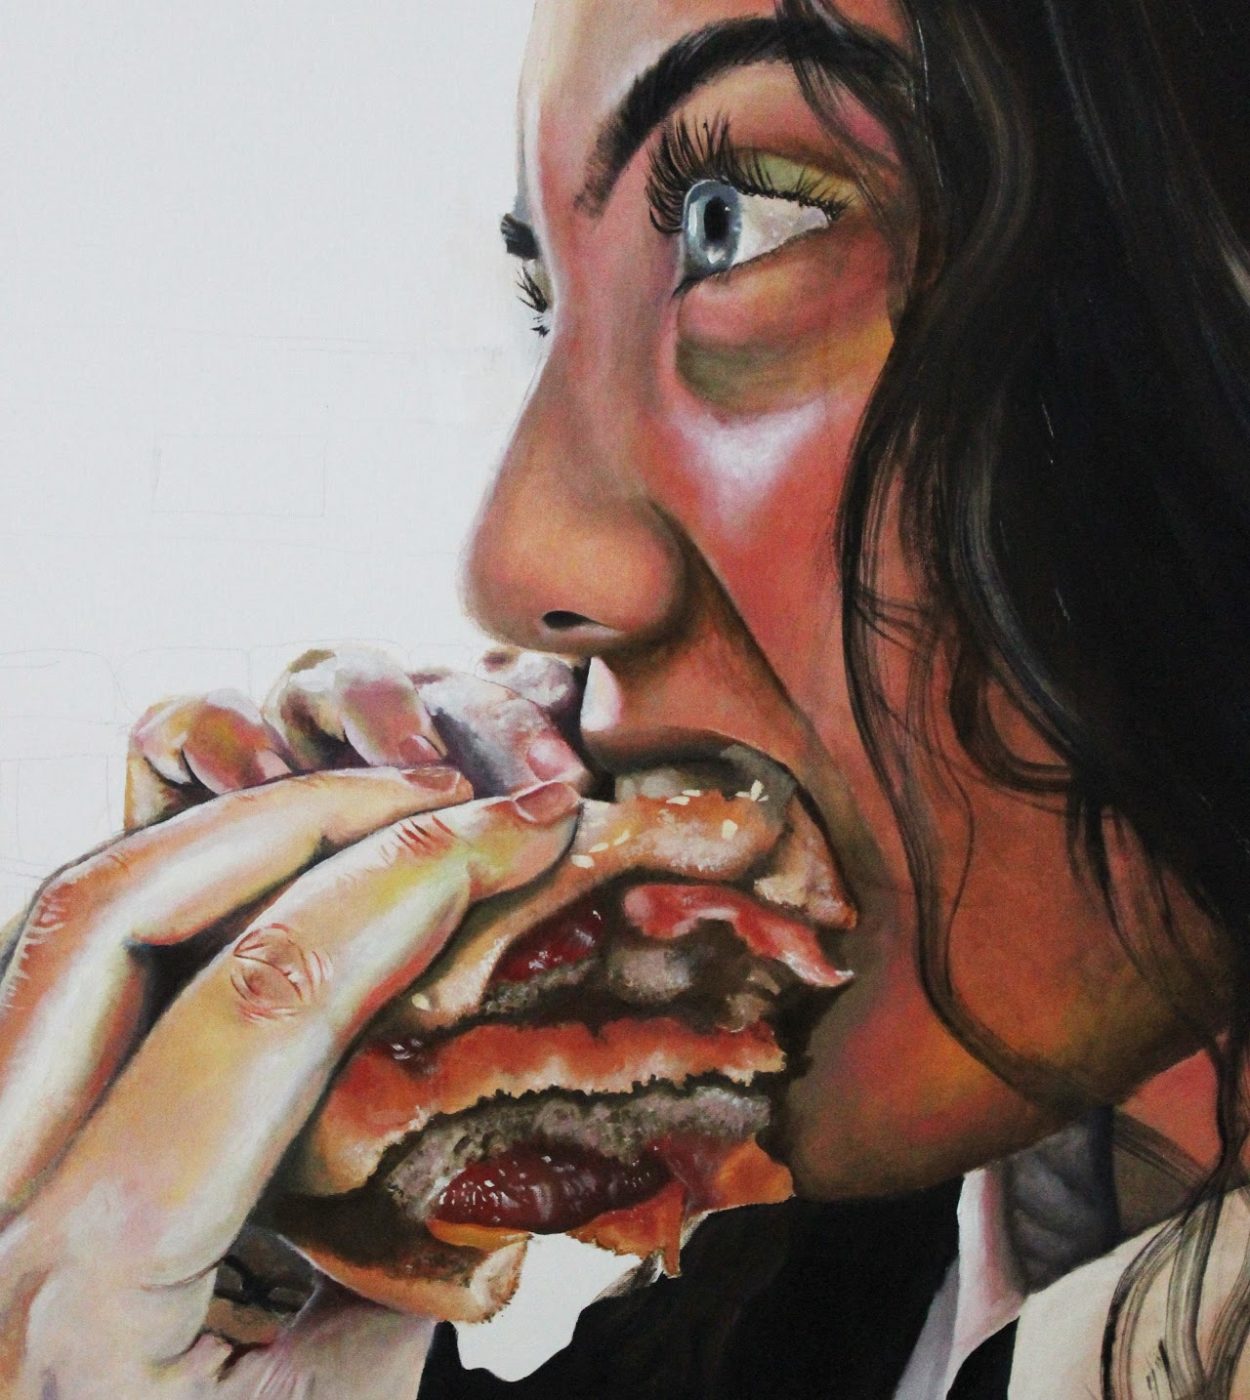 A portrait of a female eating a burger by an art student